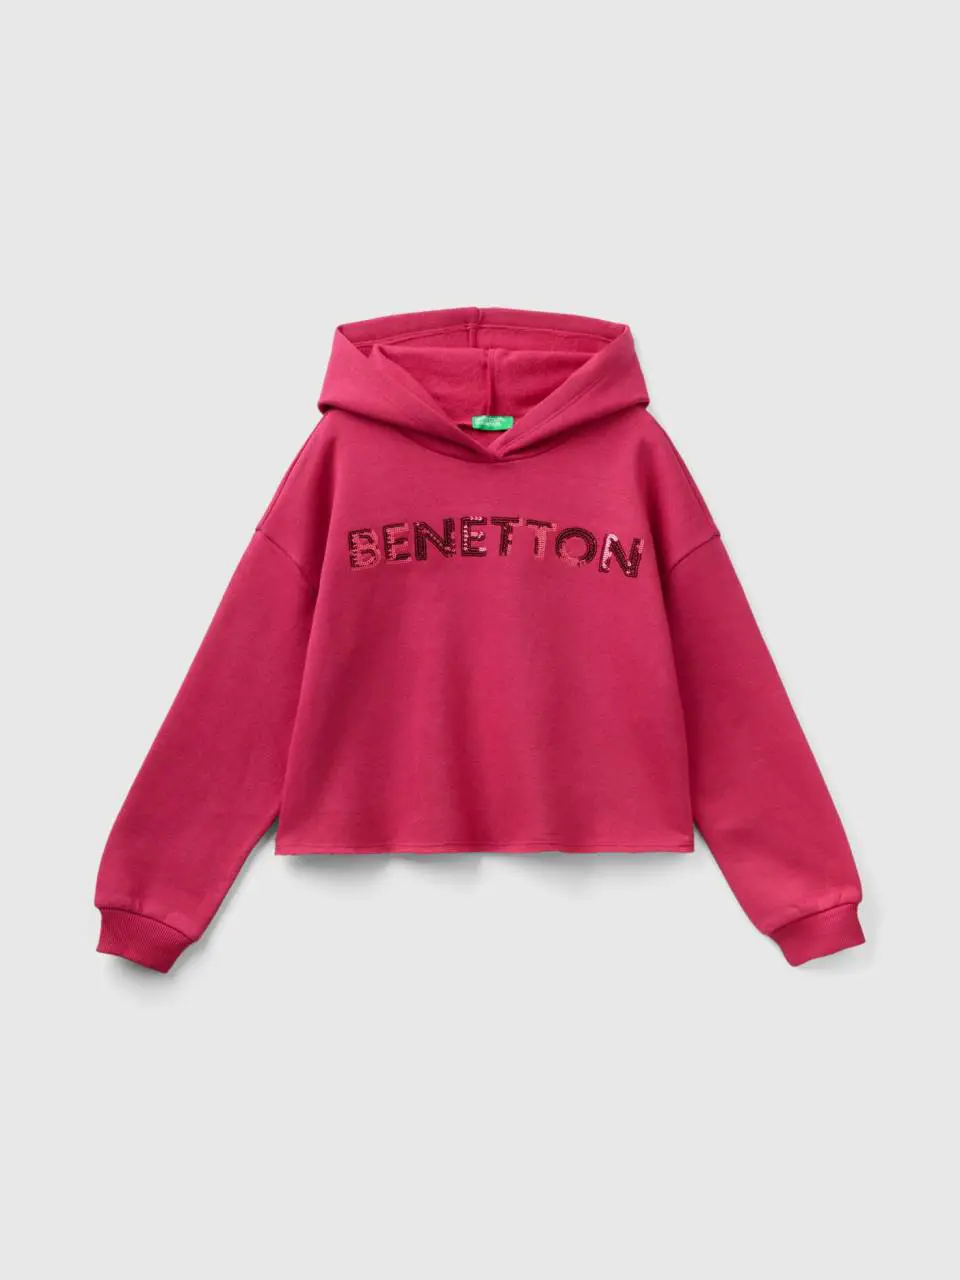 Benetton hoodie with sequins. 1